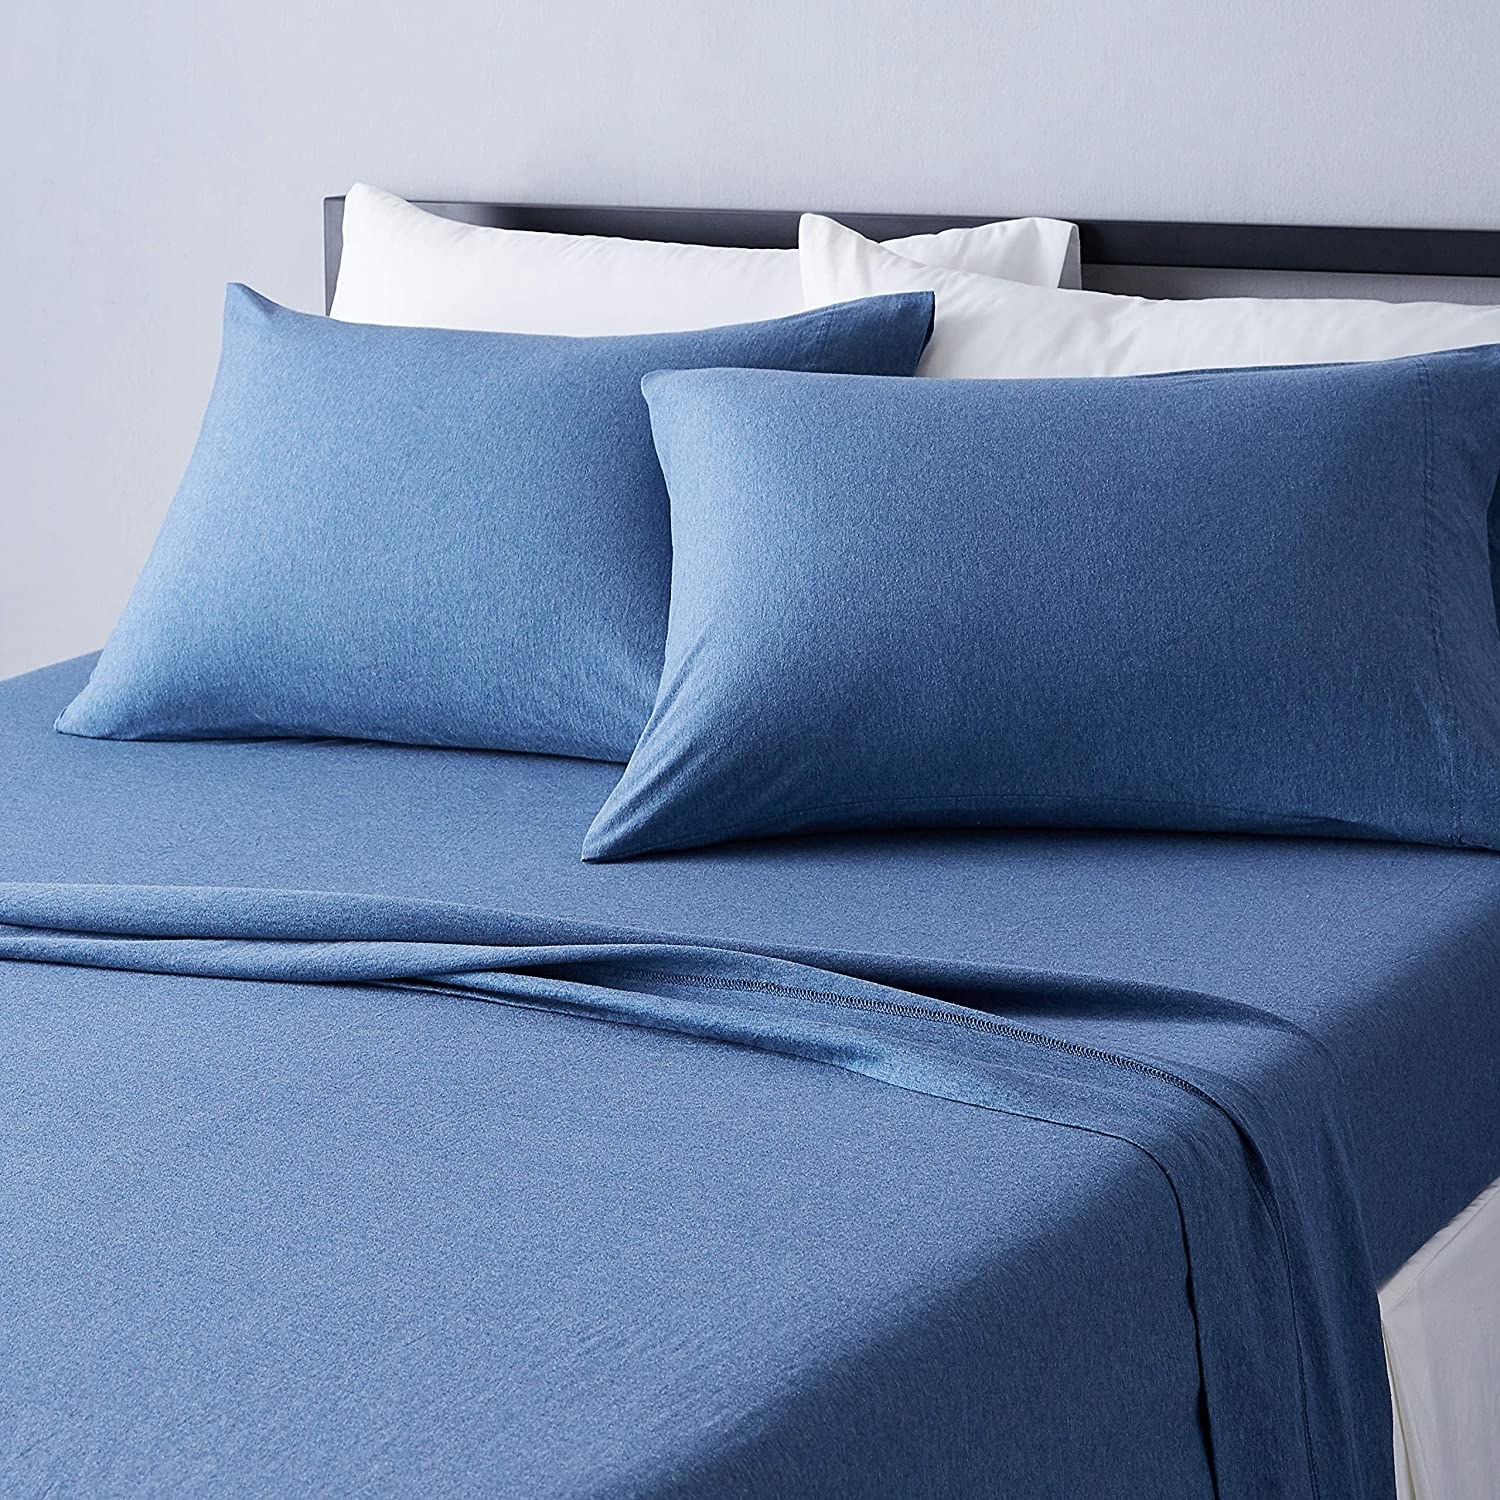 a chambray sheet set on a neatly made up bed